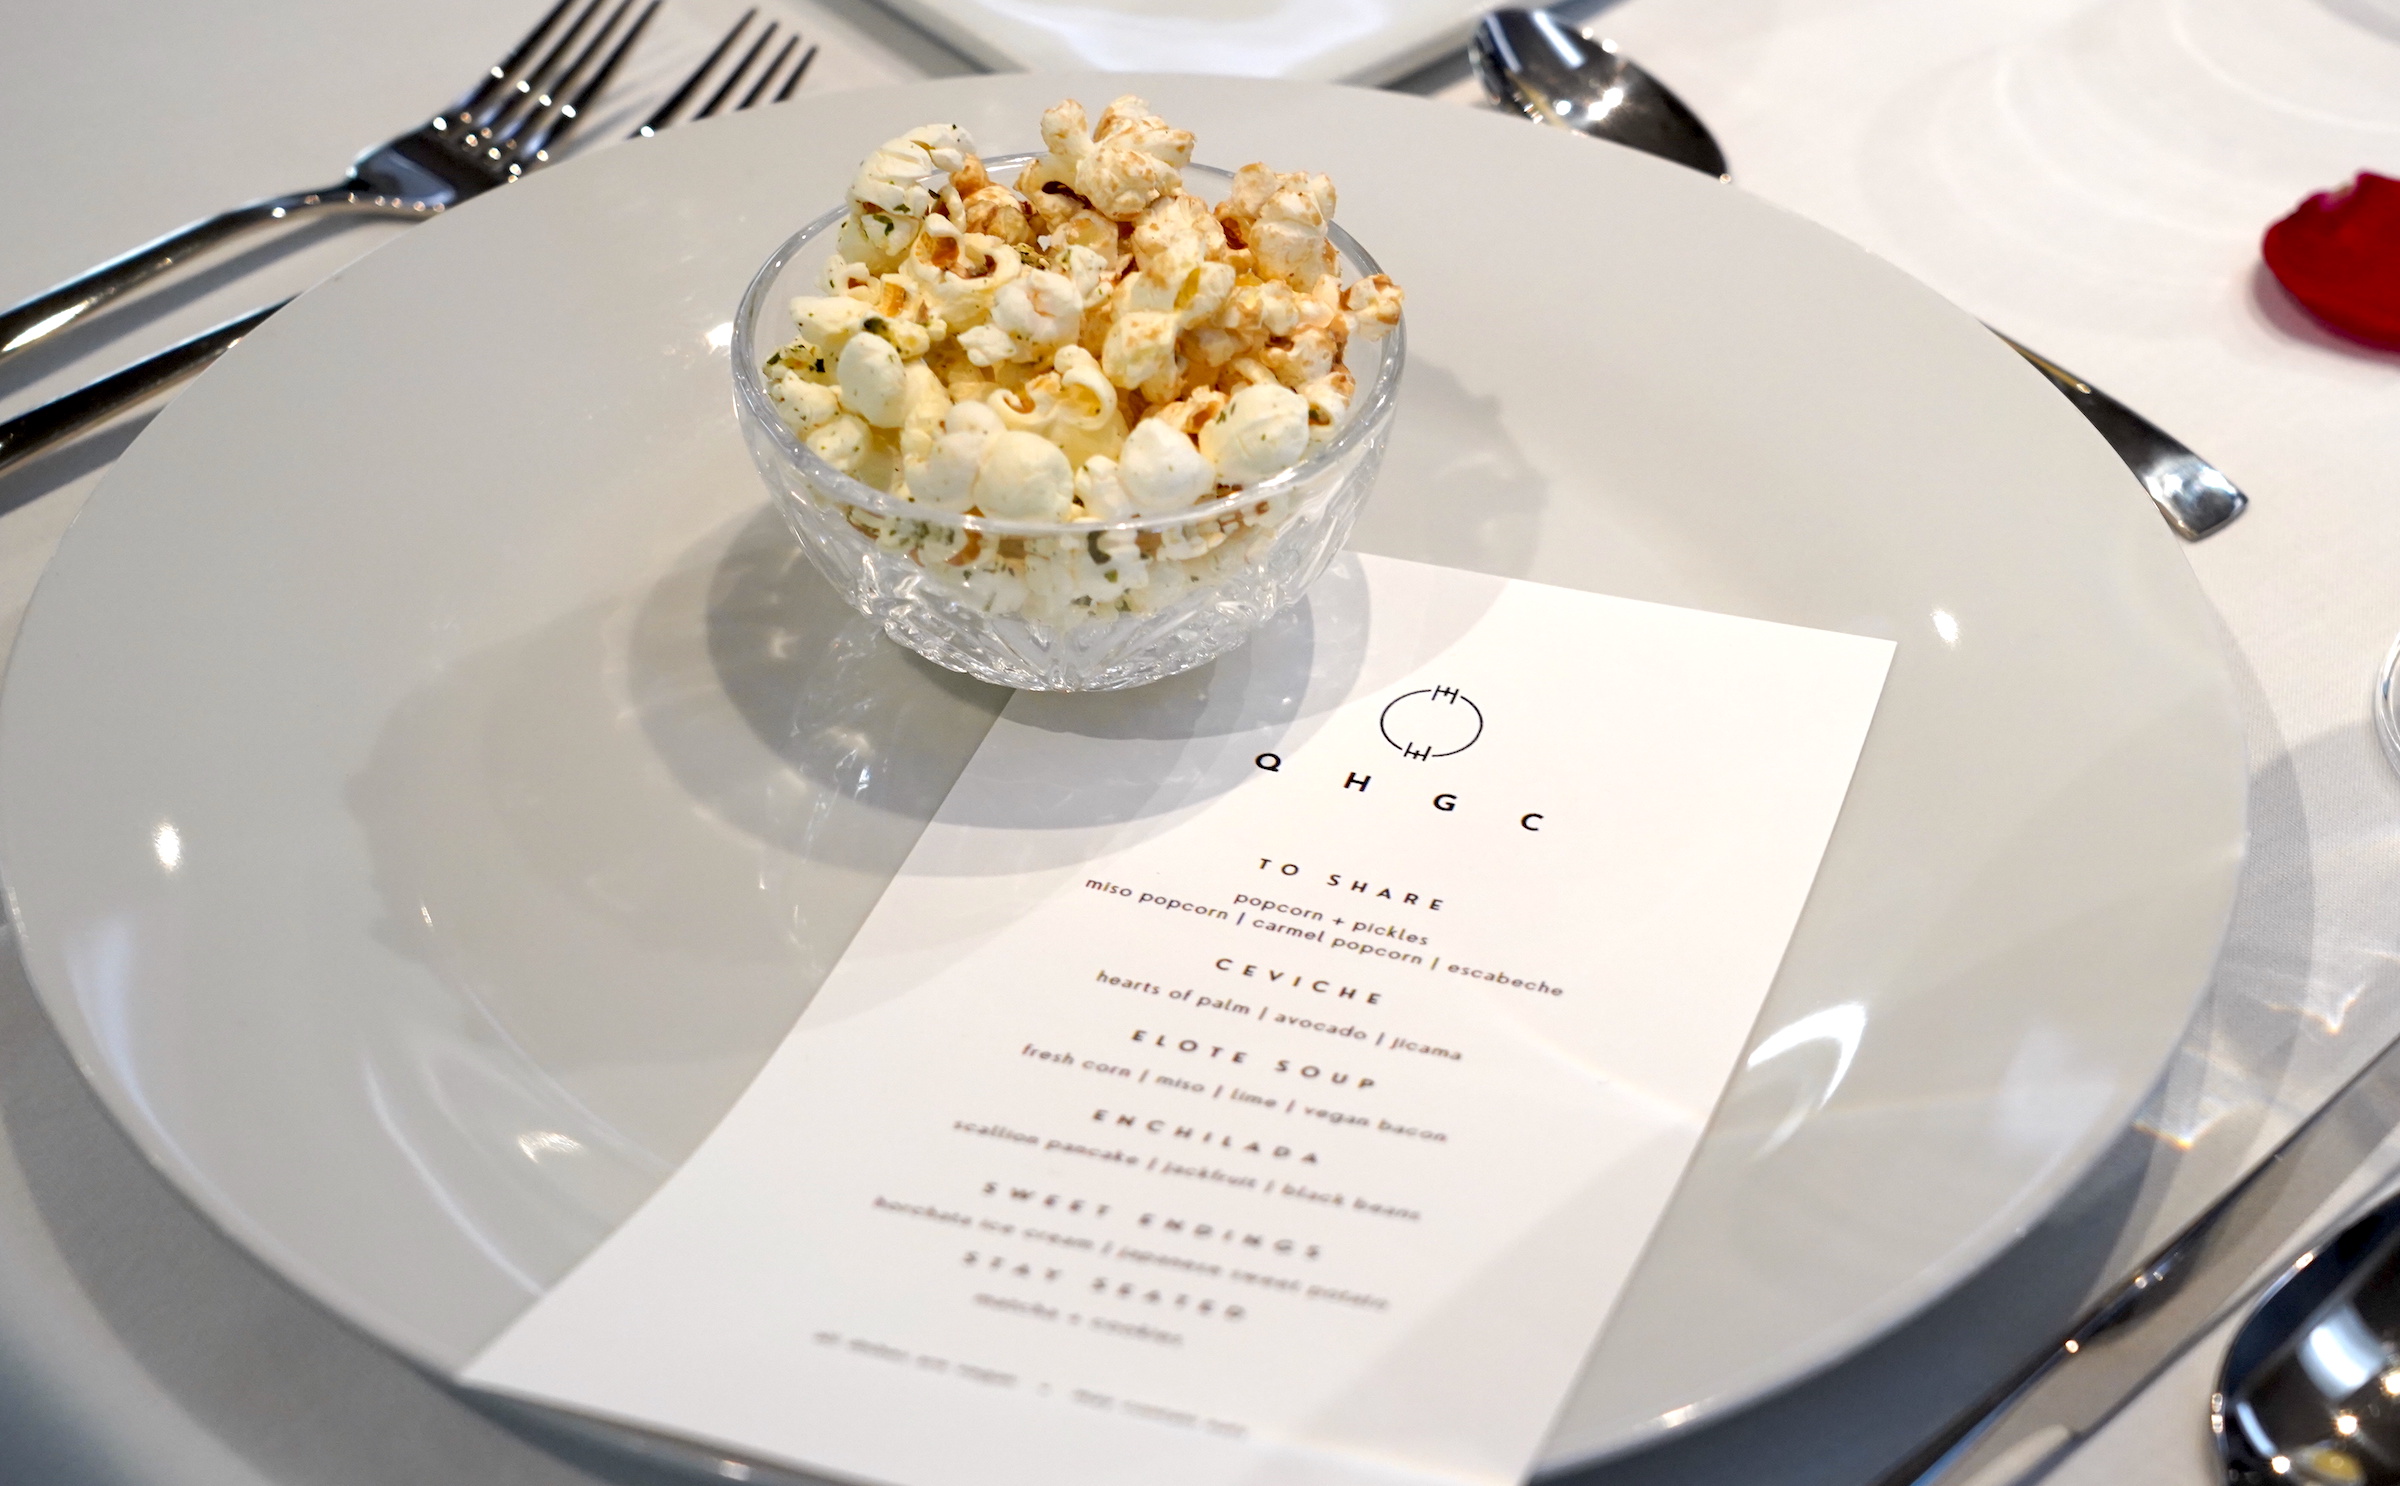 A small glass bowl of popcorn sits on a white plate with a white menu titled "QHGC"